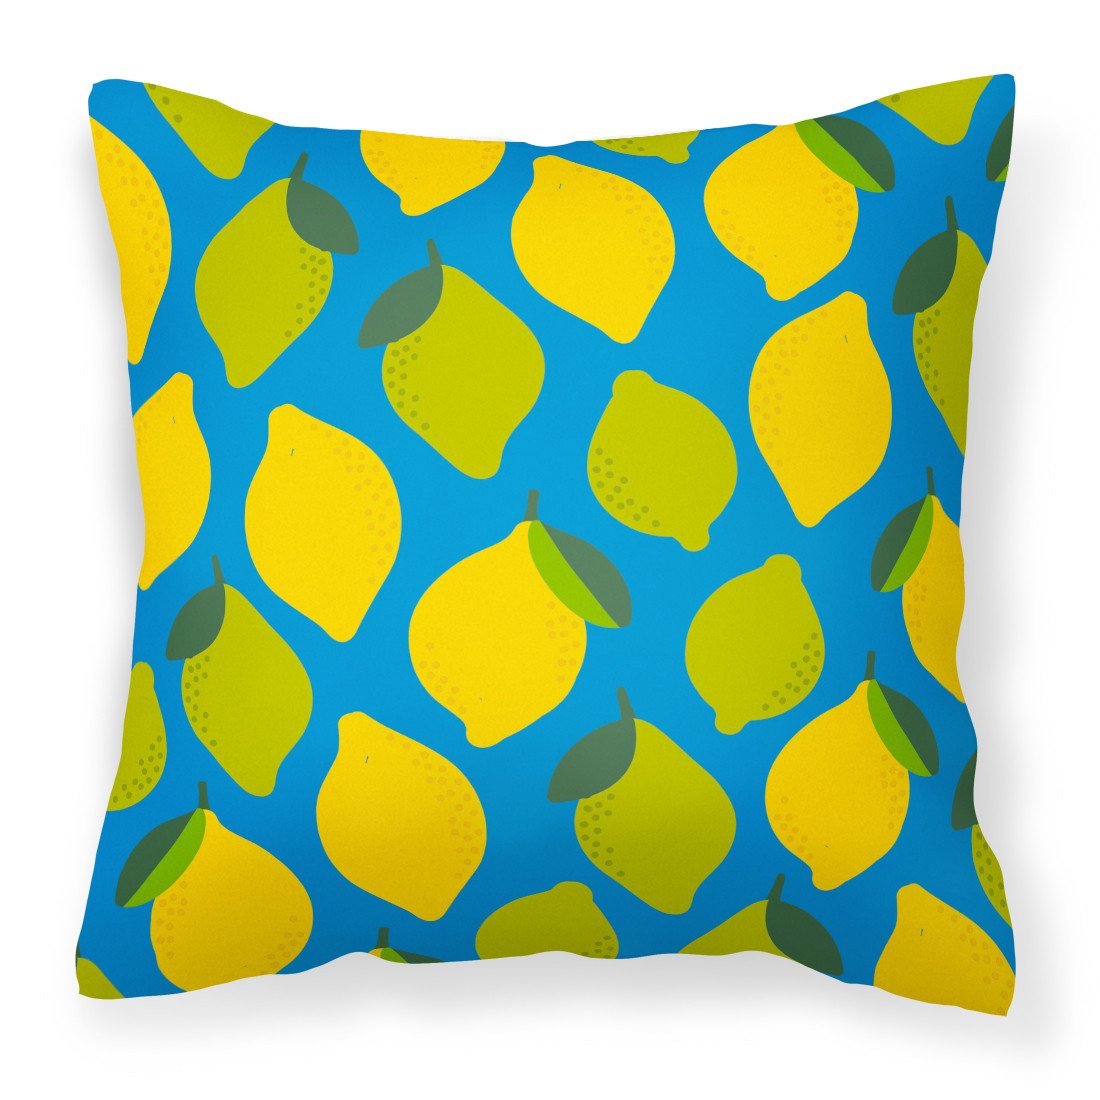 Lemons and Limes Fabric Decorative Pillow BB5150PW1818 by Caroline's Treasures